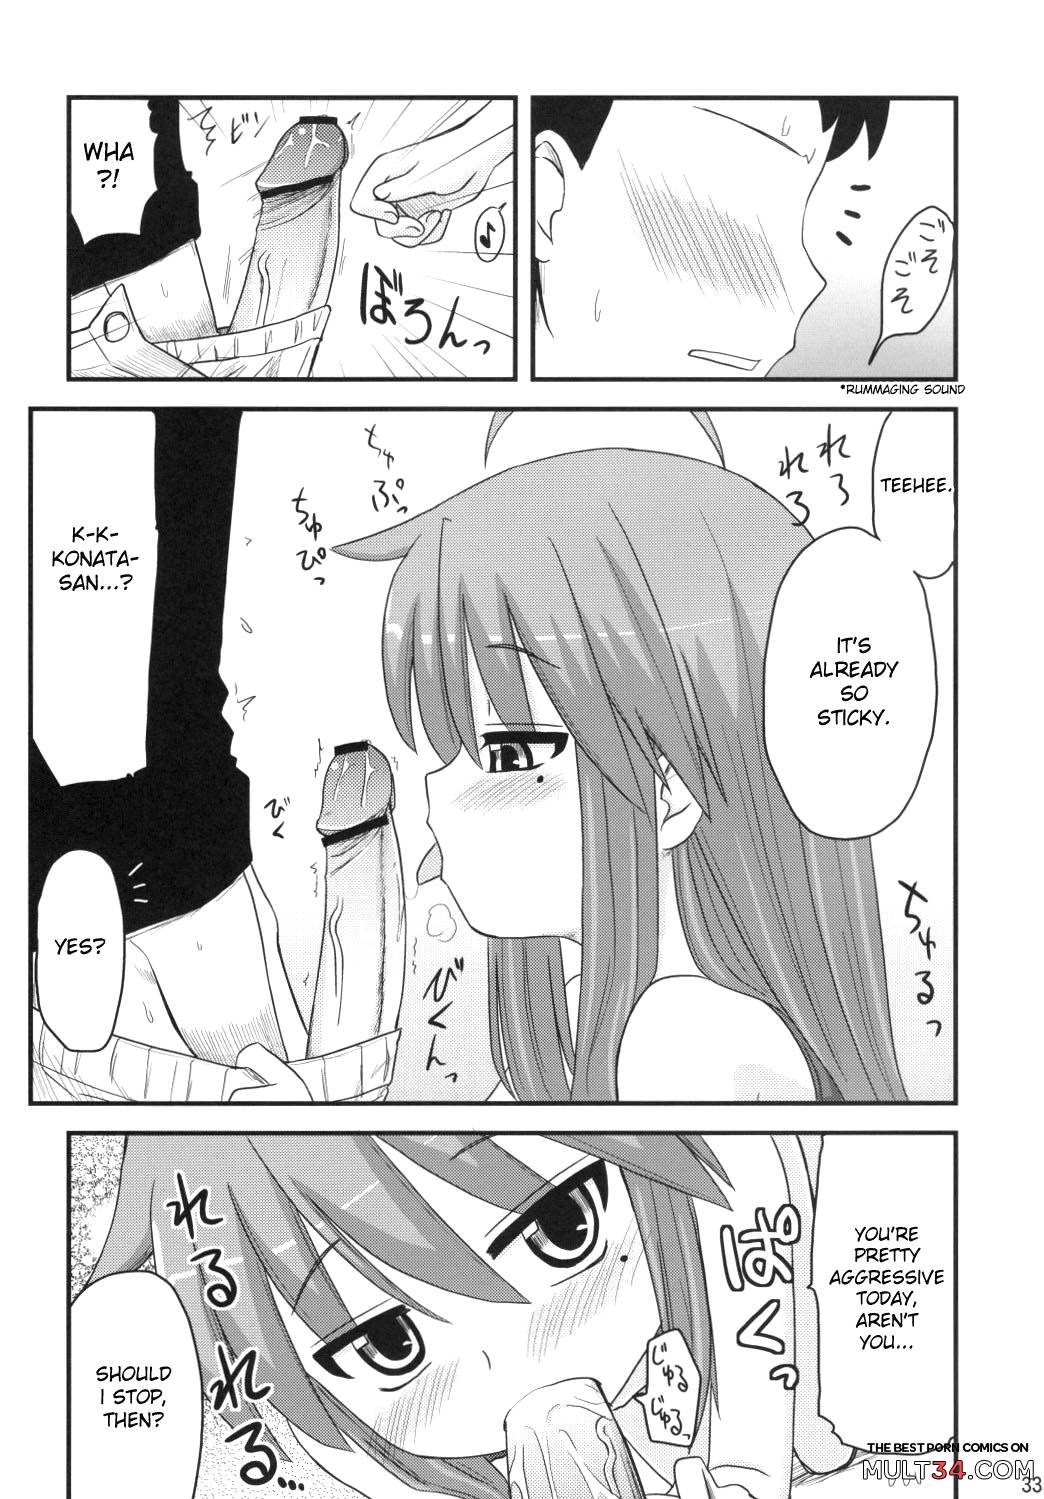 Konata and Oh-zu 4 people each and every one + 1 page 29